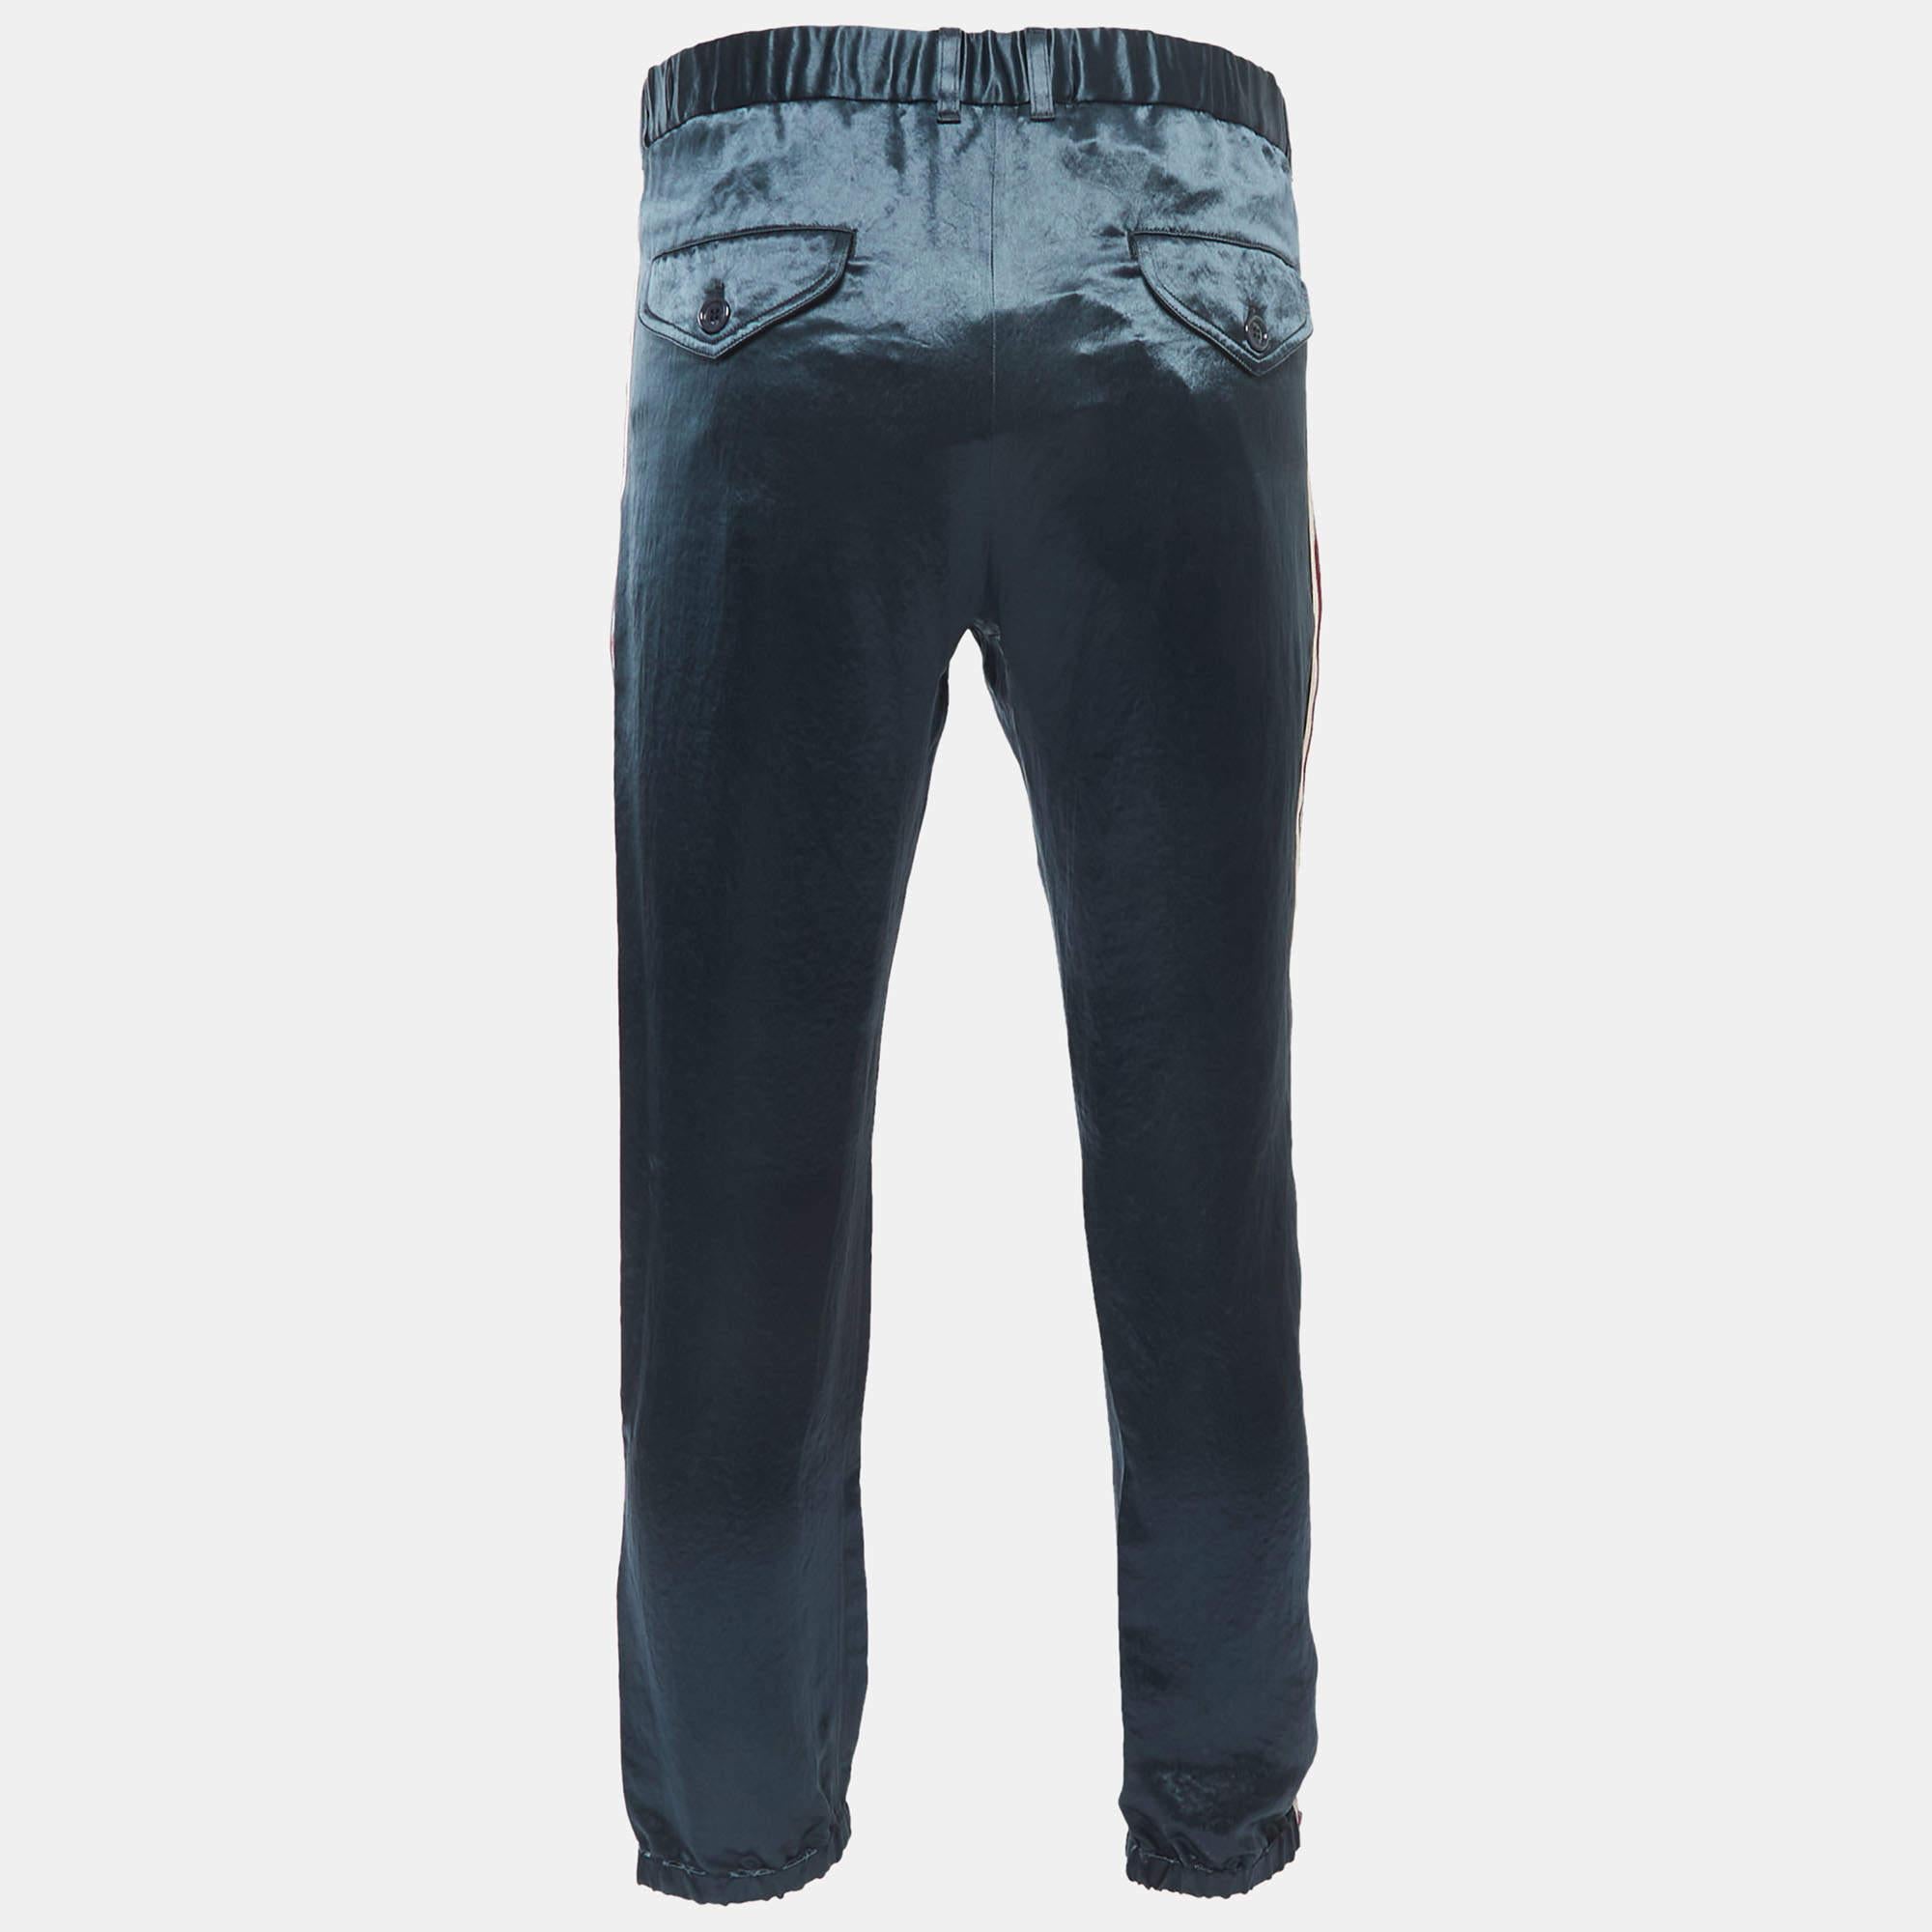 The Gucci trousers exude luxury with their deep green satin fabric. They feature the iconic Gucci web stripe along the sides, adding a touch of elegance. These relaxed-fit trousers offer both comfort and high-end style for fashion-forward